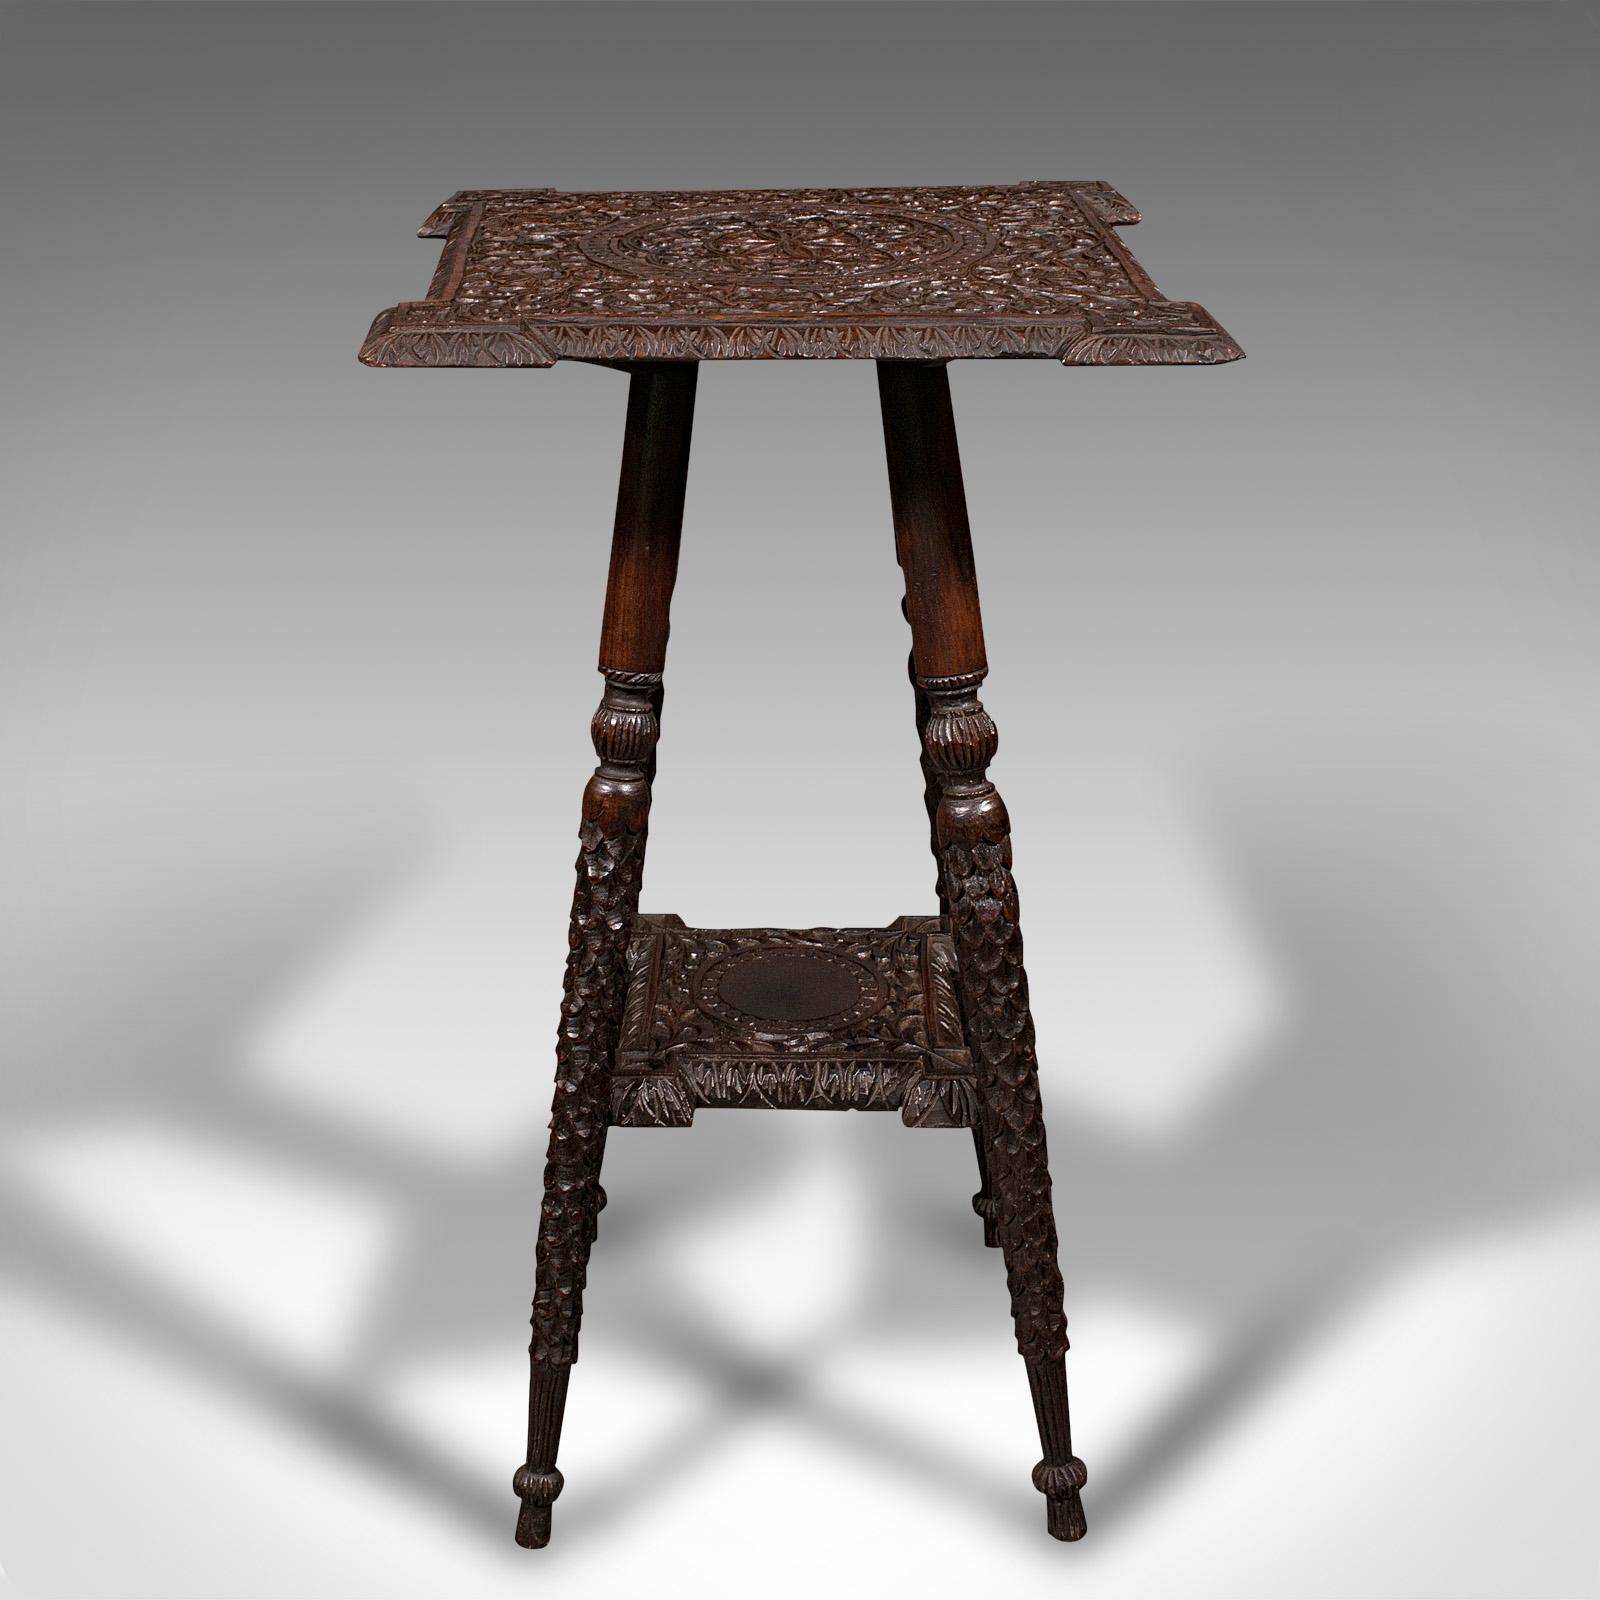 This is a small antique lamp table. An Indian, carved teak decorative occasional table, dating to the early Victorian period, circa 1850.

Of petite form and appealing carved finish
Displays a desirable aged patina and in good original